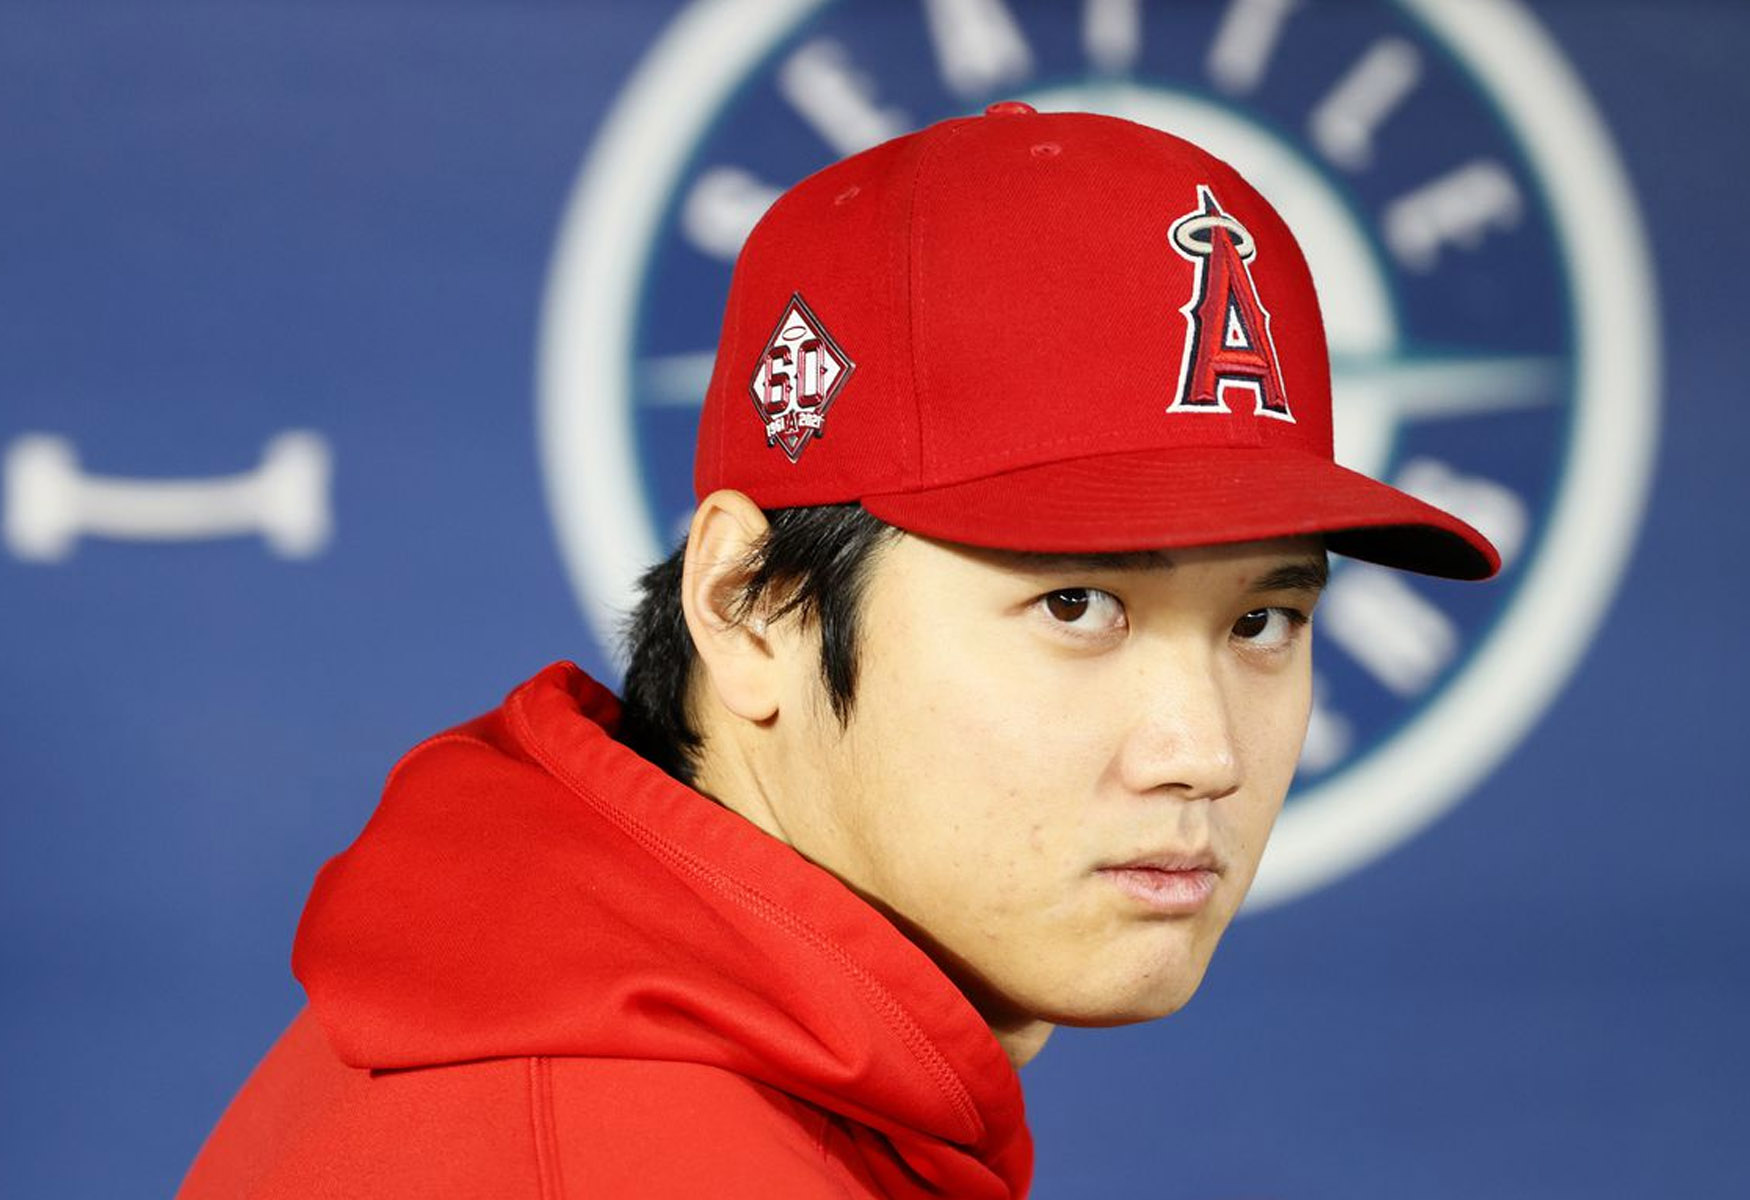 new-offer-for-shohei-ohtani-free-sandwiches-and-a-restaurant-name-change-to-sign-with-giants